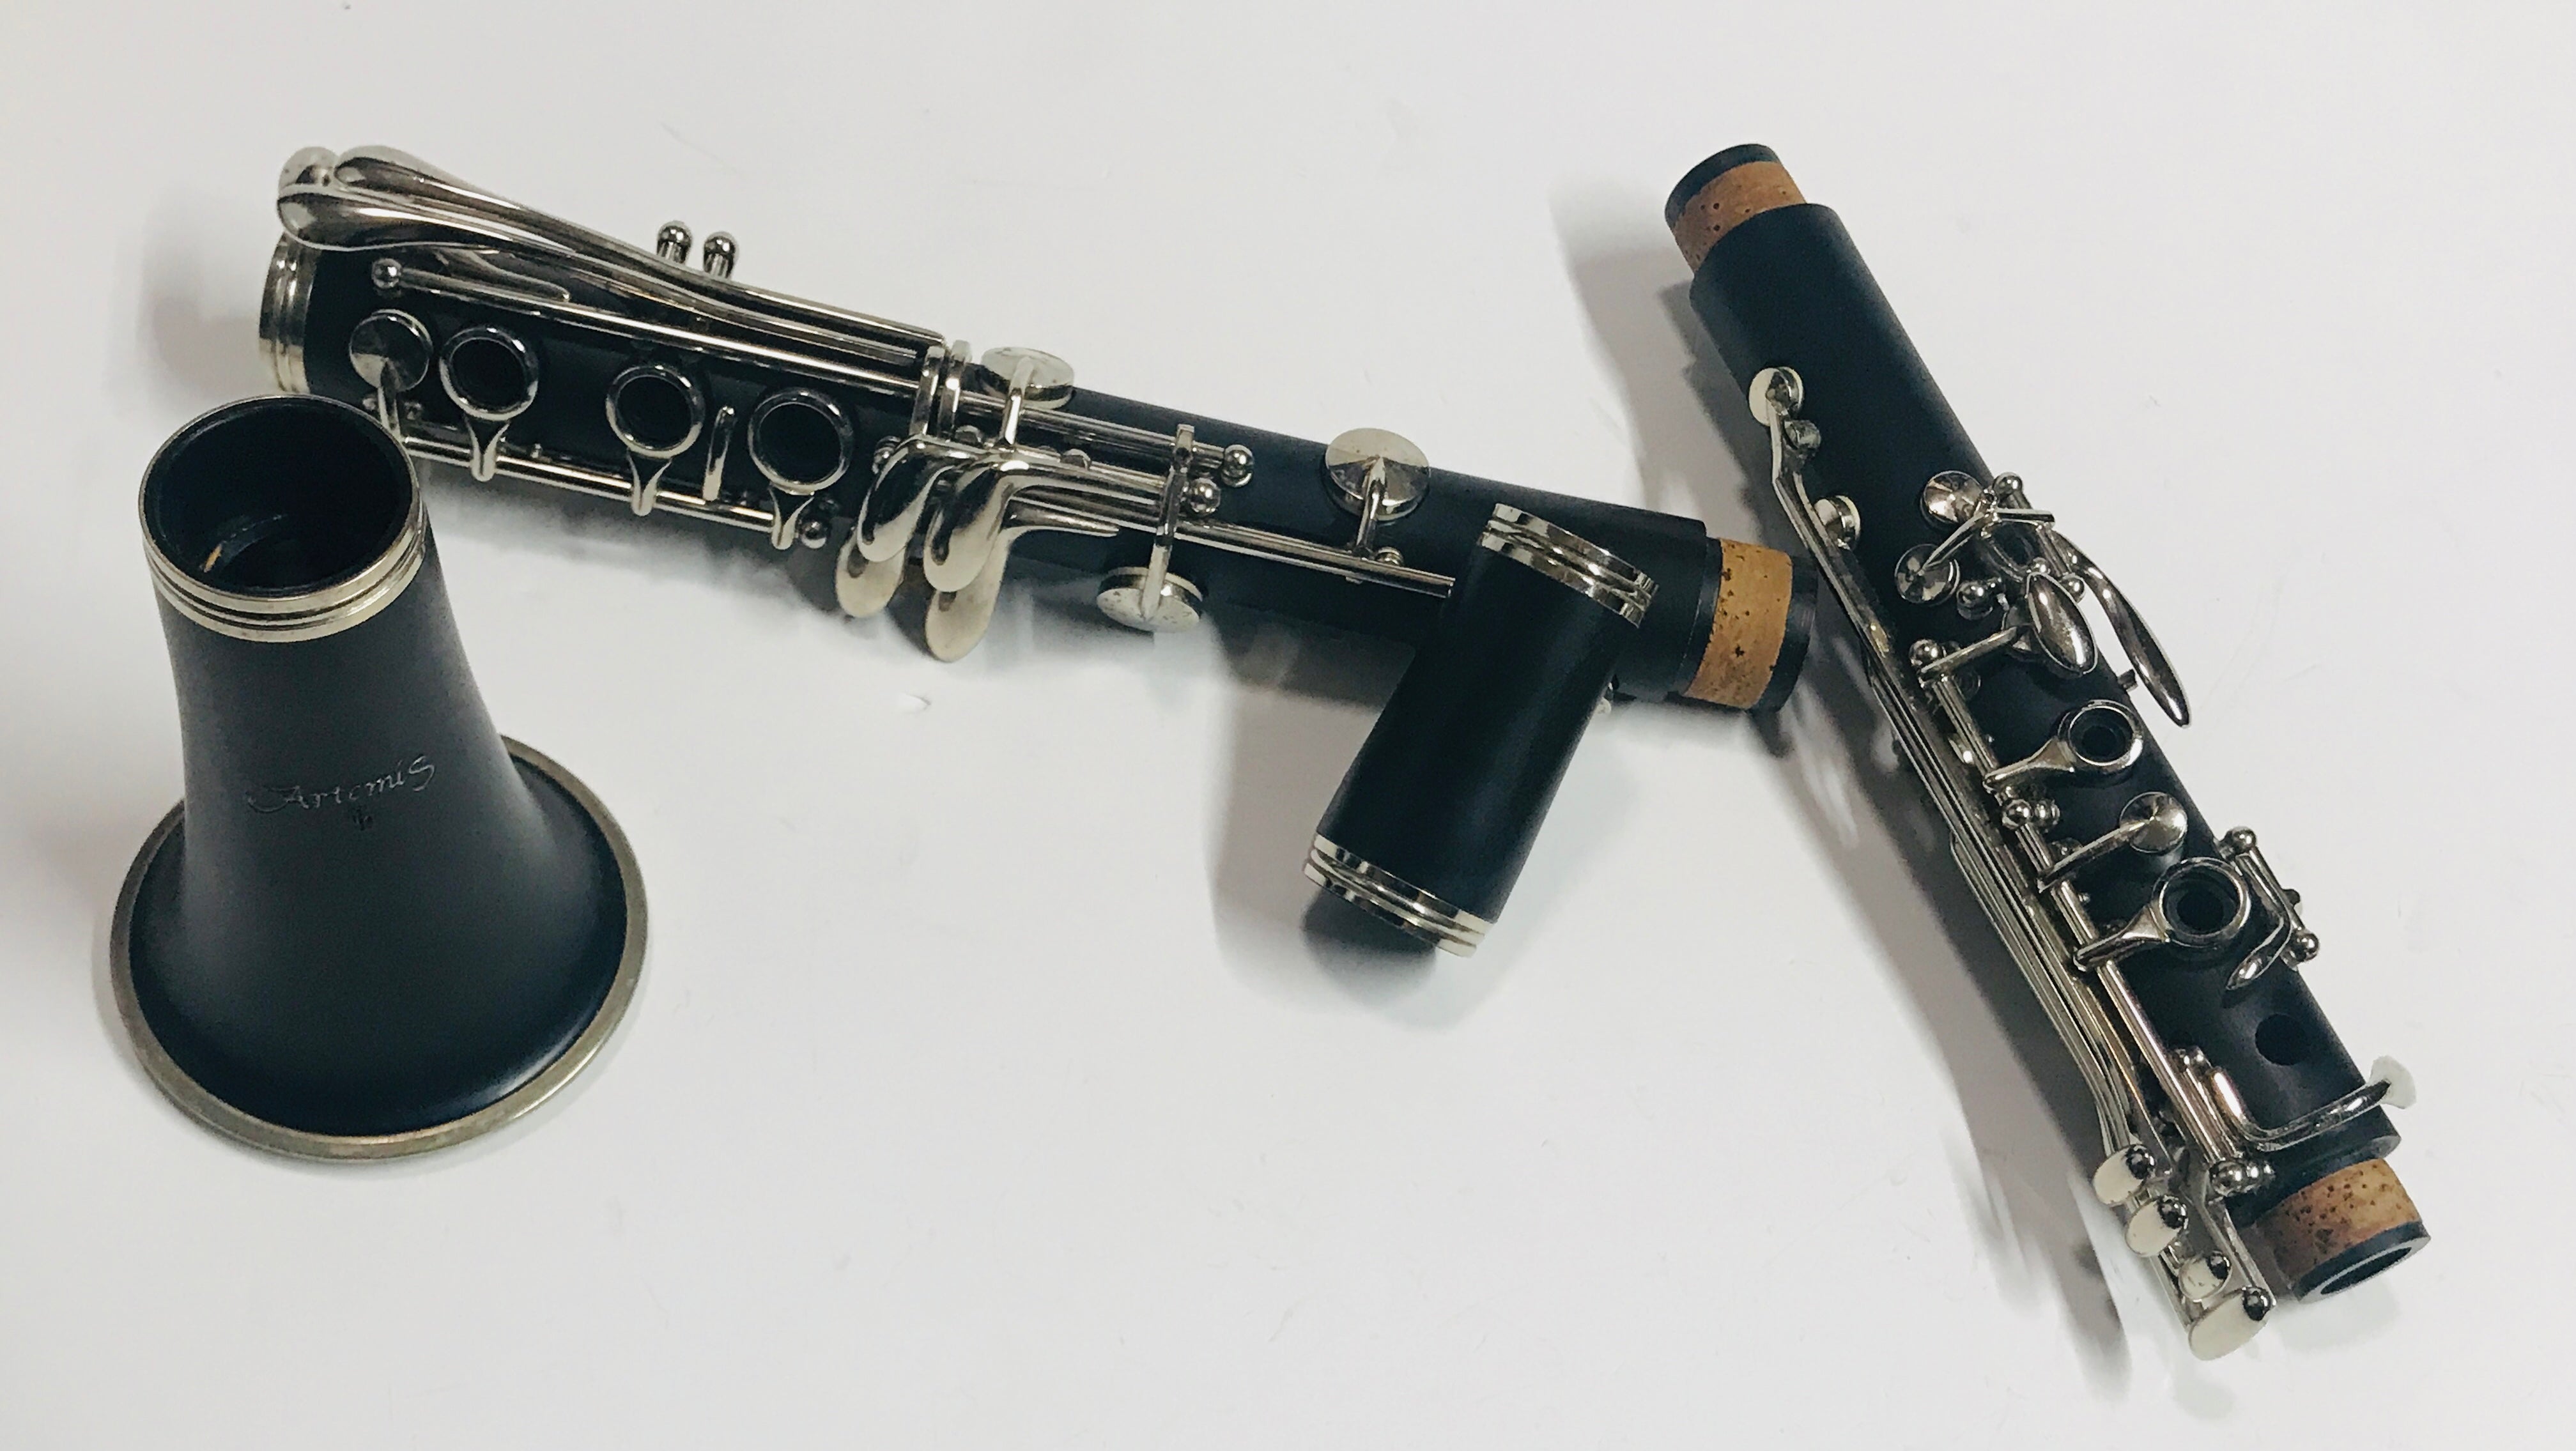 Trevor James Clarinet Artemis Plastic Student recently serviced plays well USED